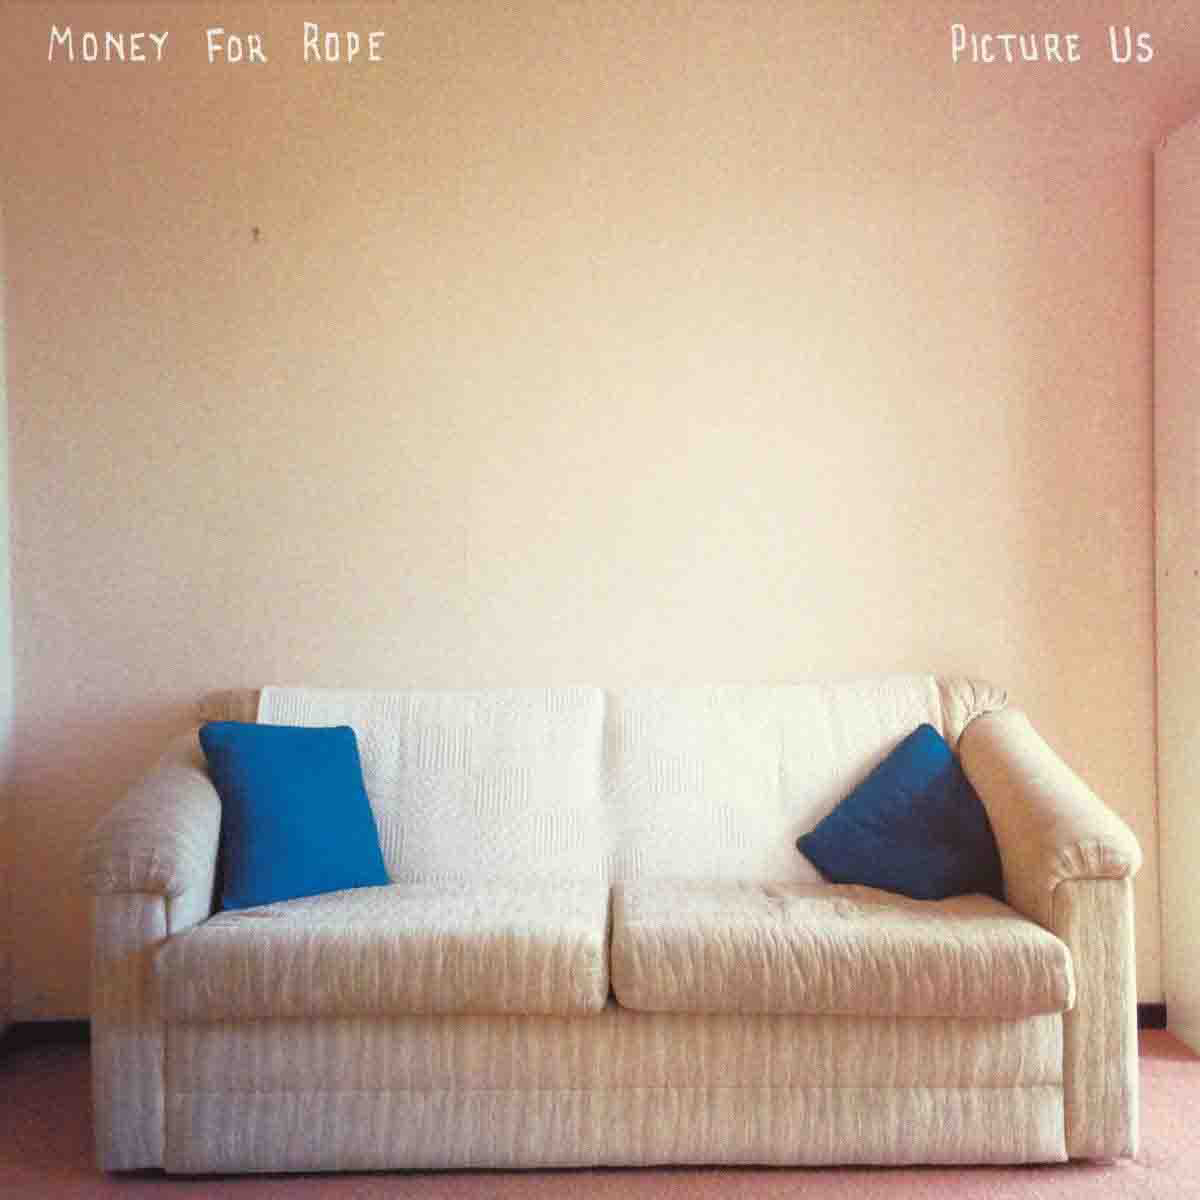 Money For - PICTURE US + (+MP3) Rope - (LP Download)